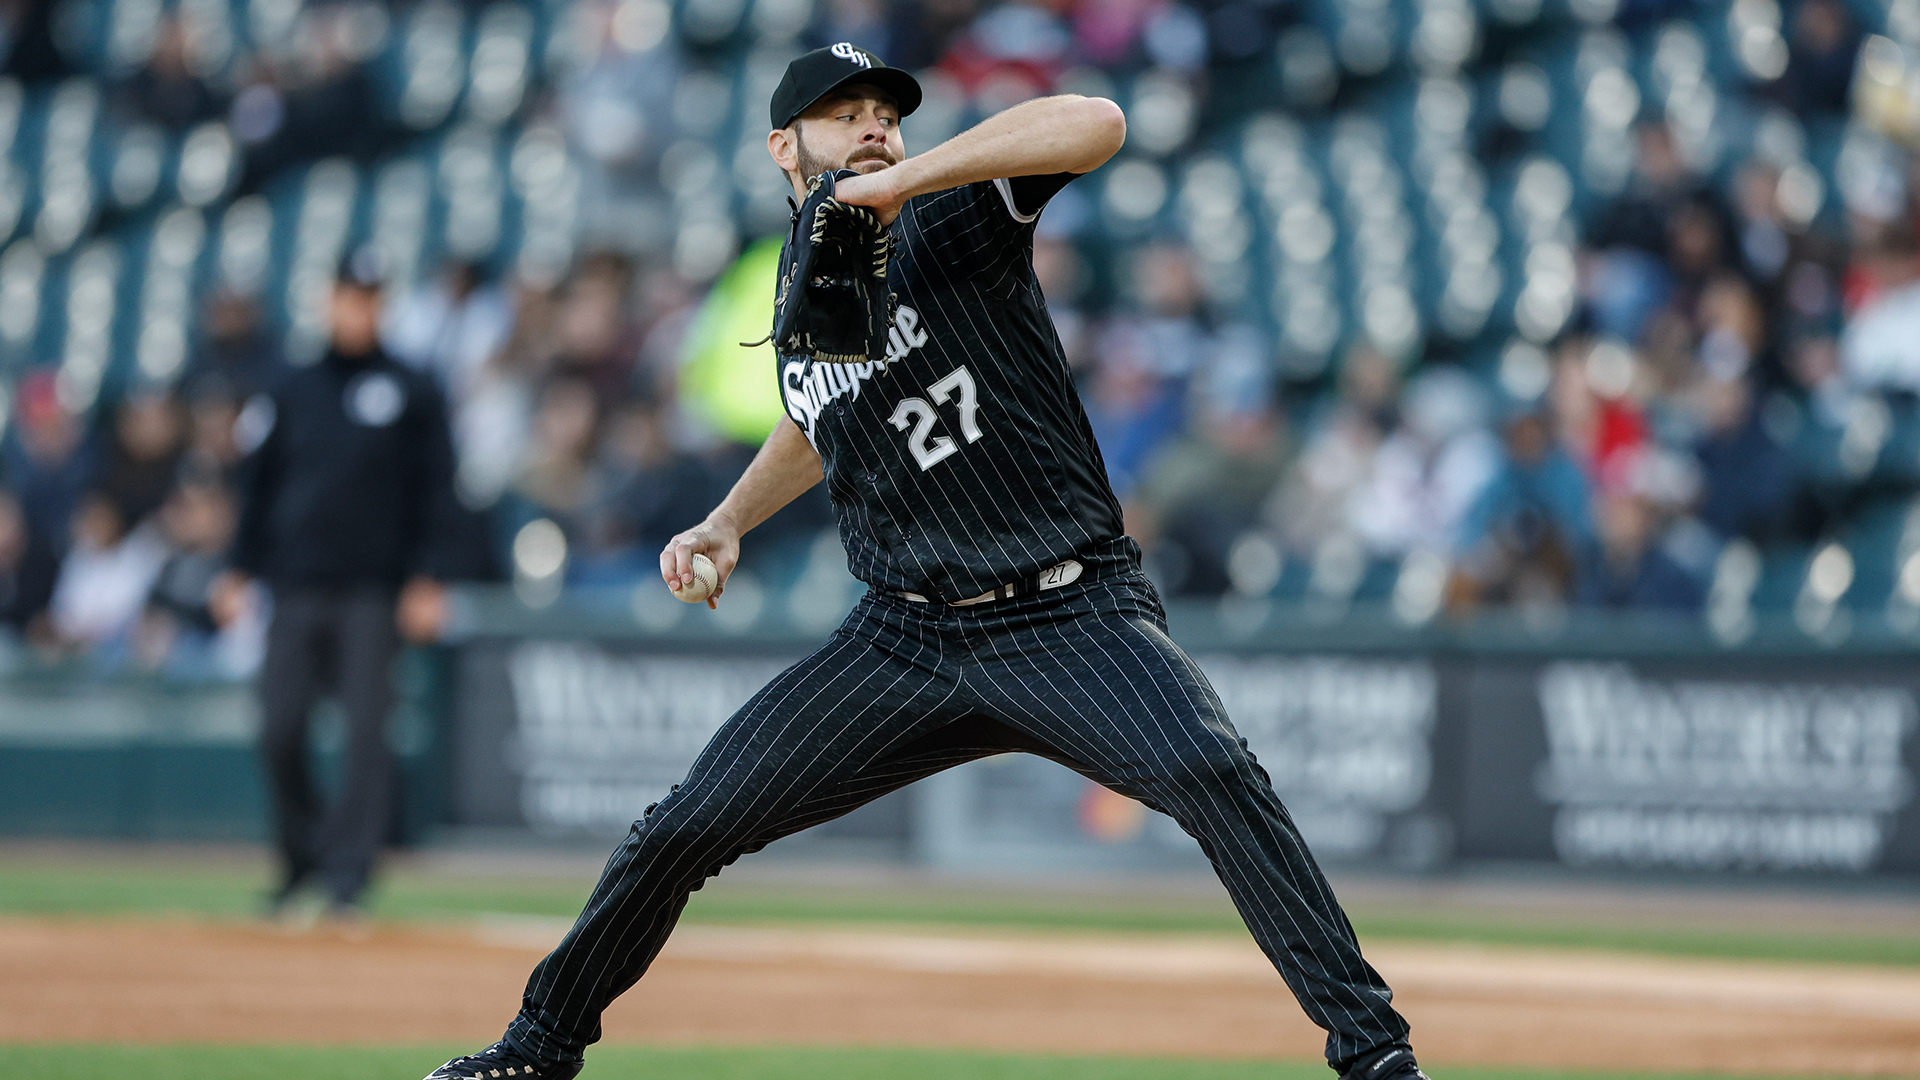 Lucas Giolito strikes out 10 in White Sox loss